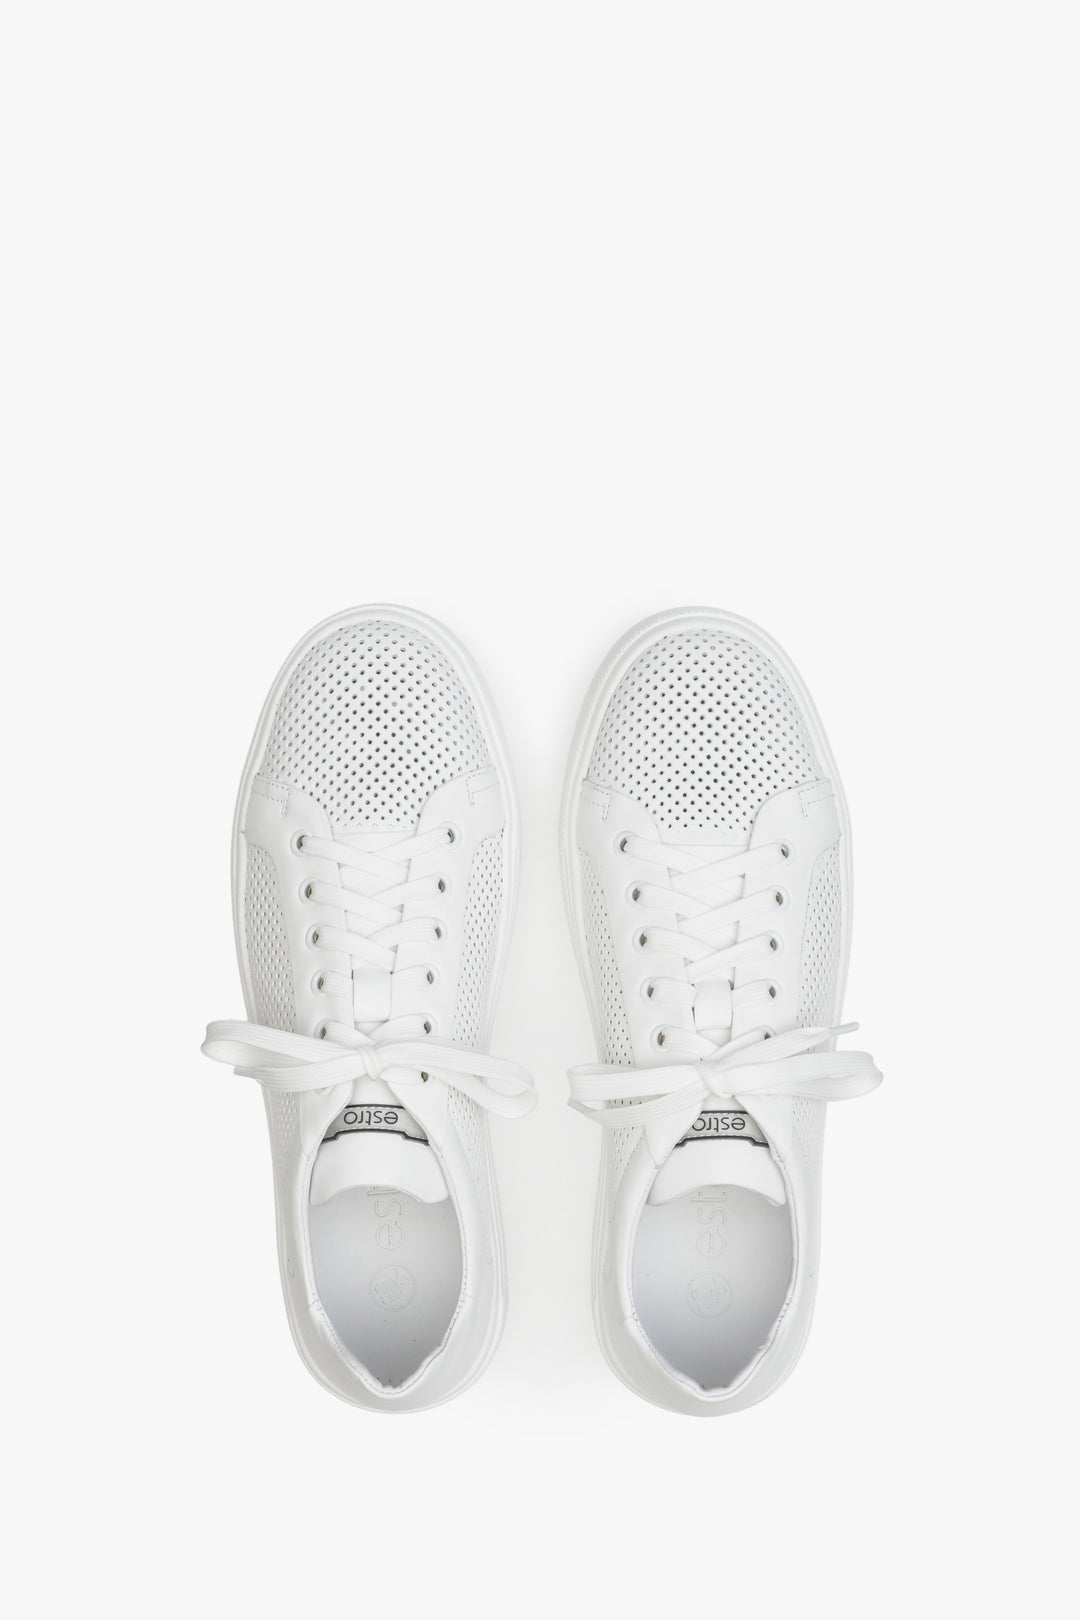 Men's white leather summer sneakers with perforation - presentation of the footwear from the top.